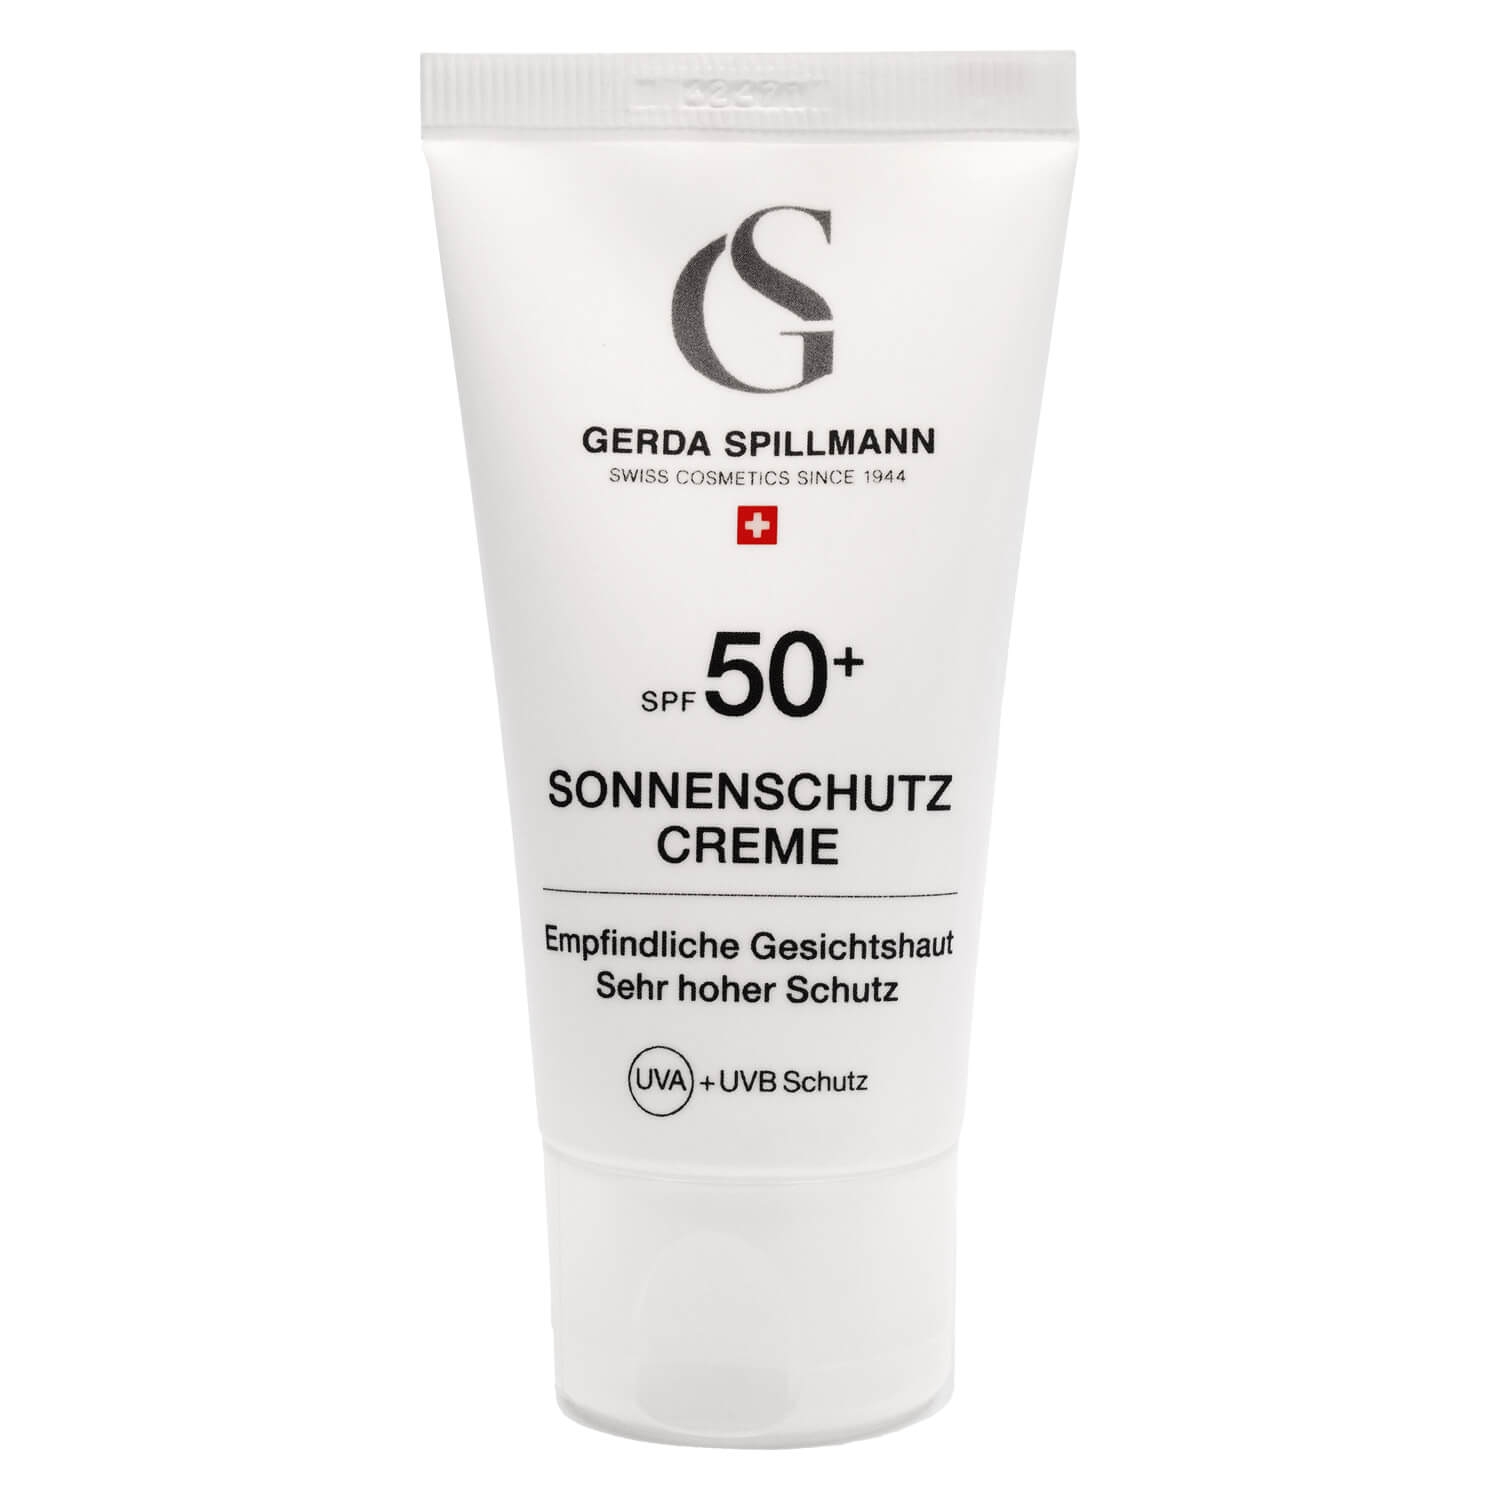 Product image from GS Skincare - Sonnenschutzcreme SPF 50+